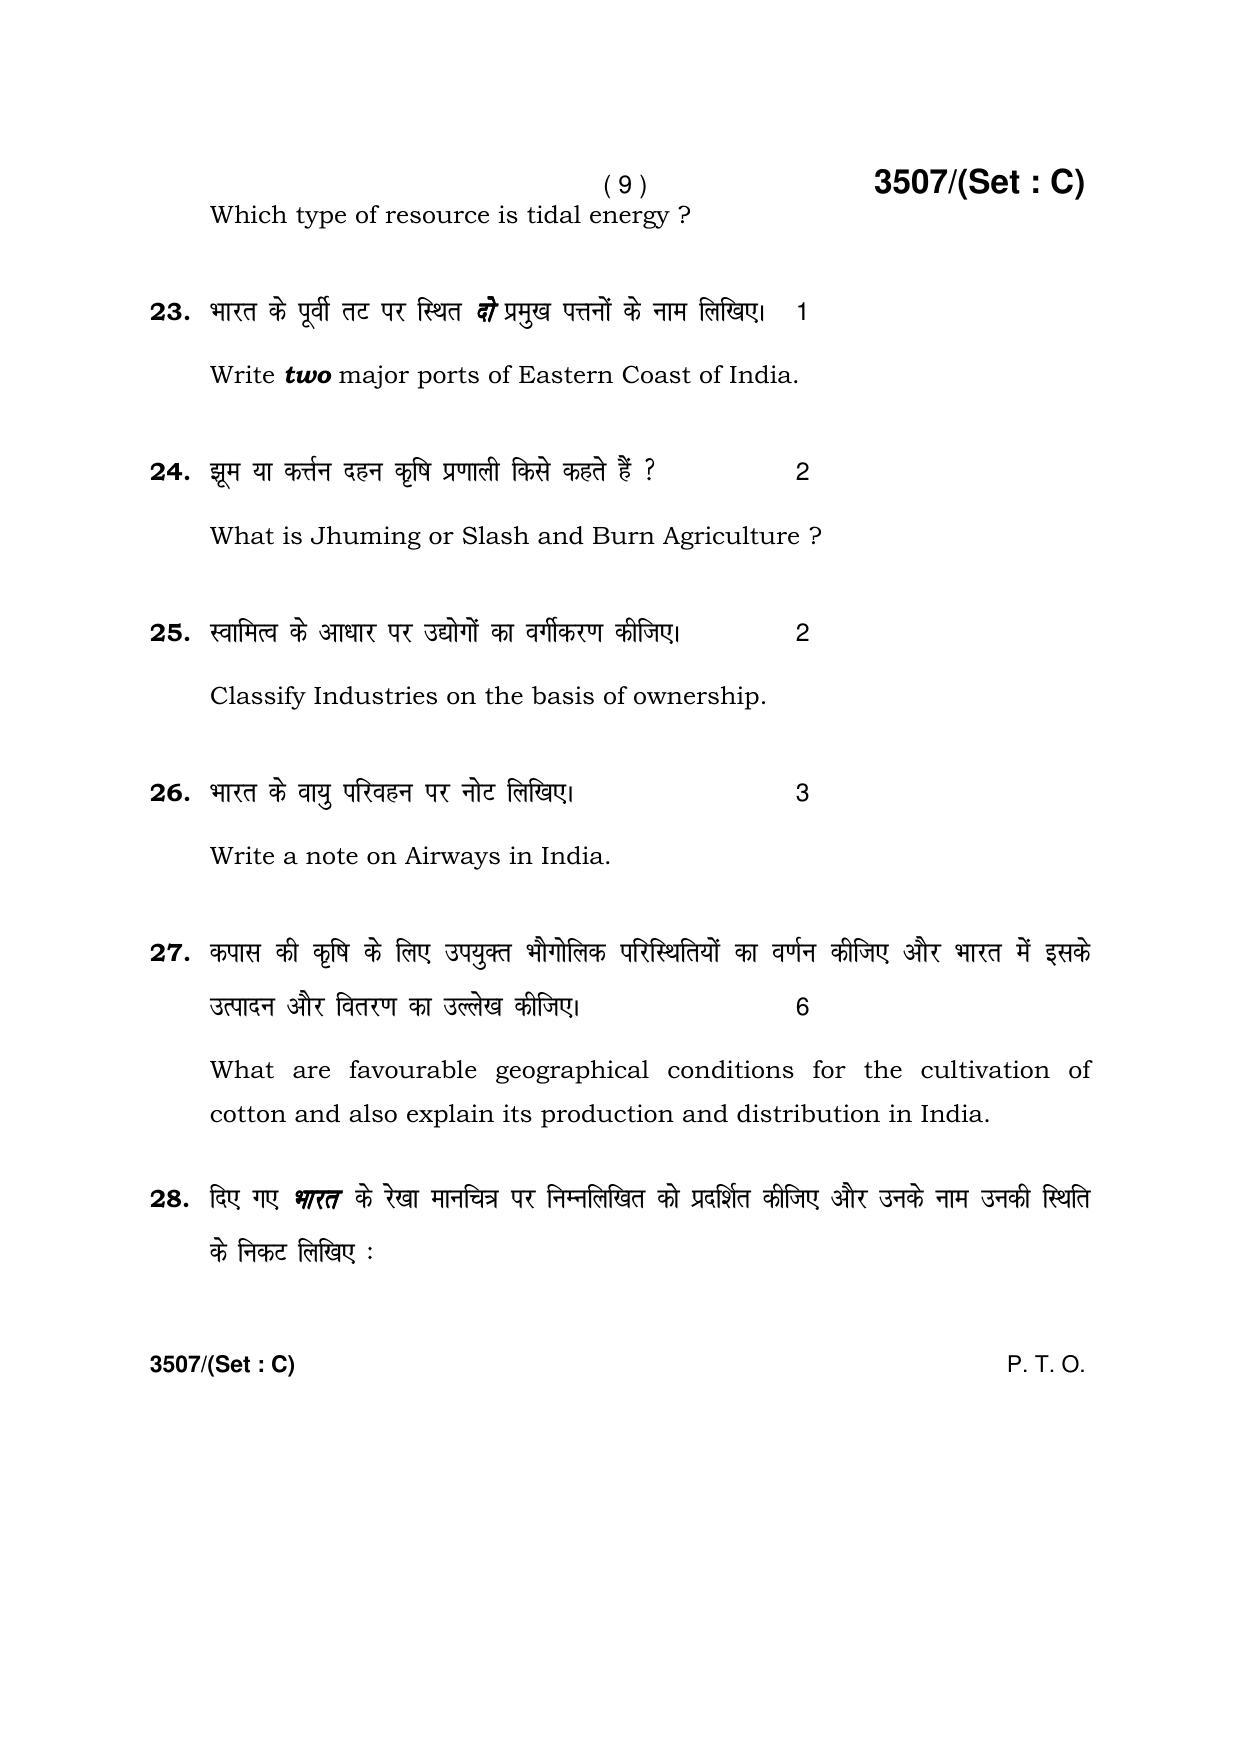  Haryana Board HBSE Class 10 Social Science -C 2018 Question Paper - Page 9